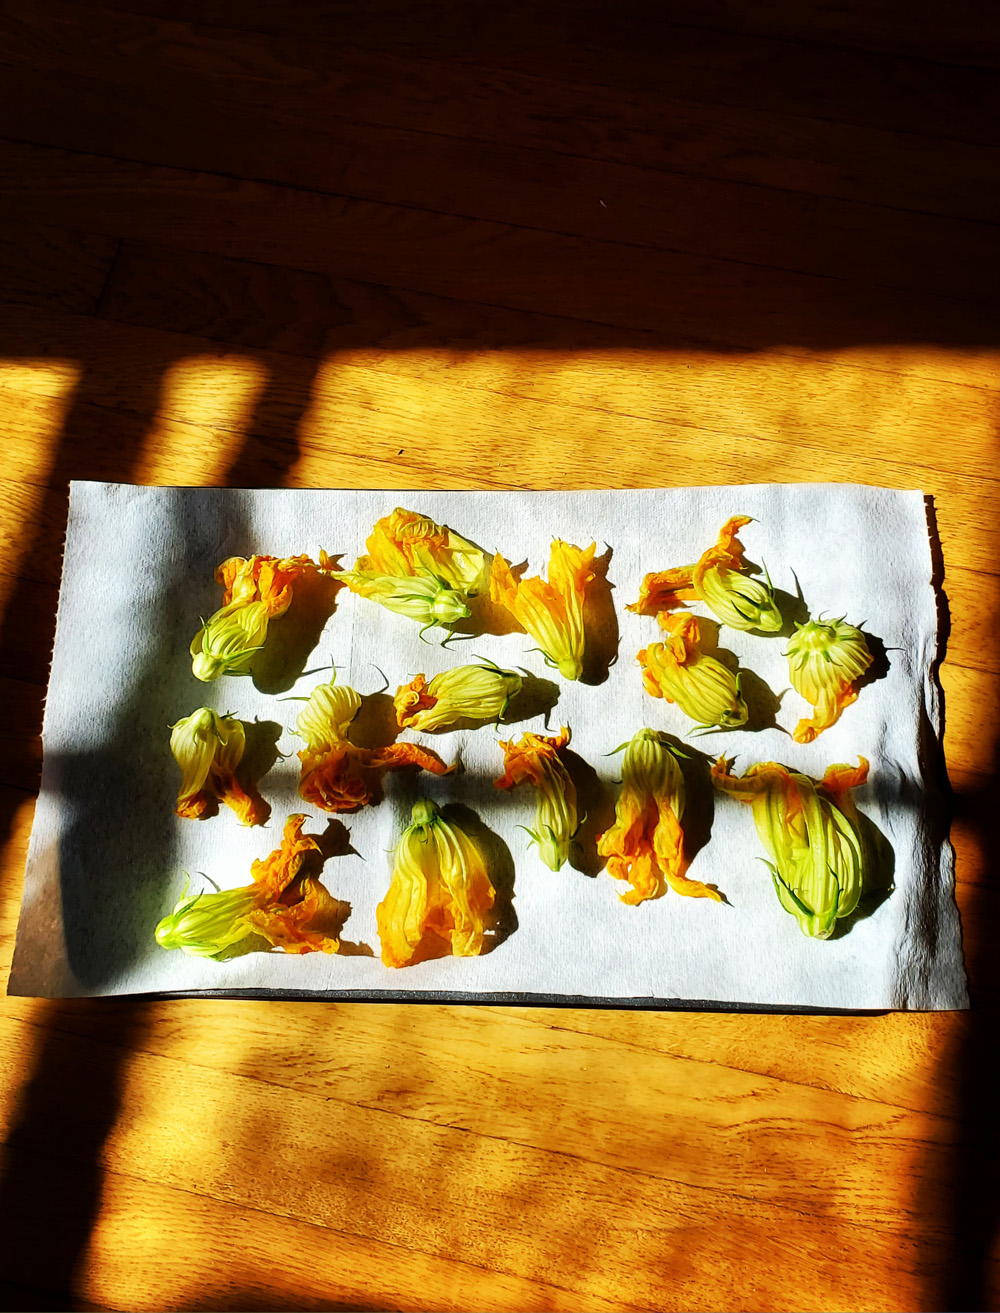 Issue 49 cover featuring squash blossoms set on a sunlit table